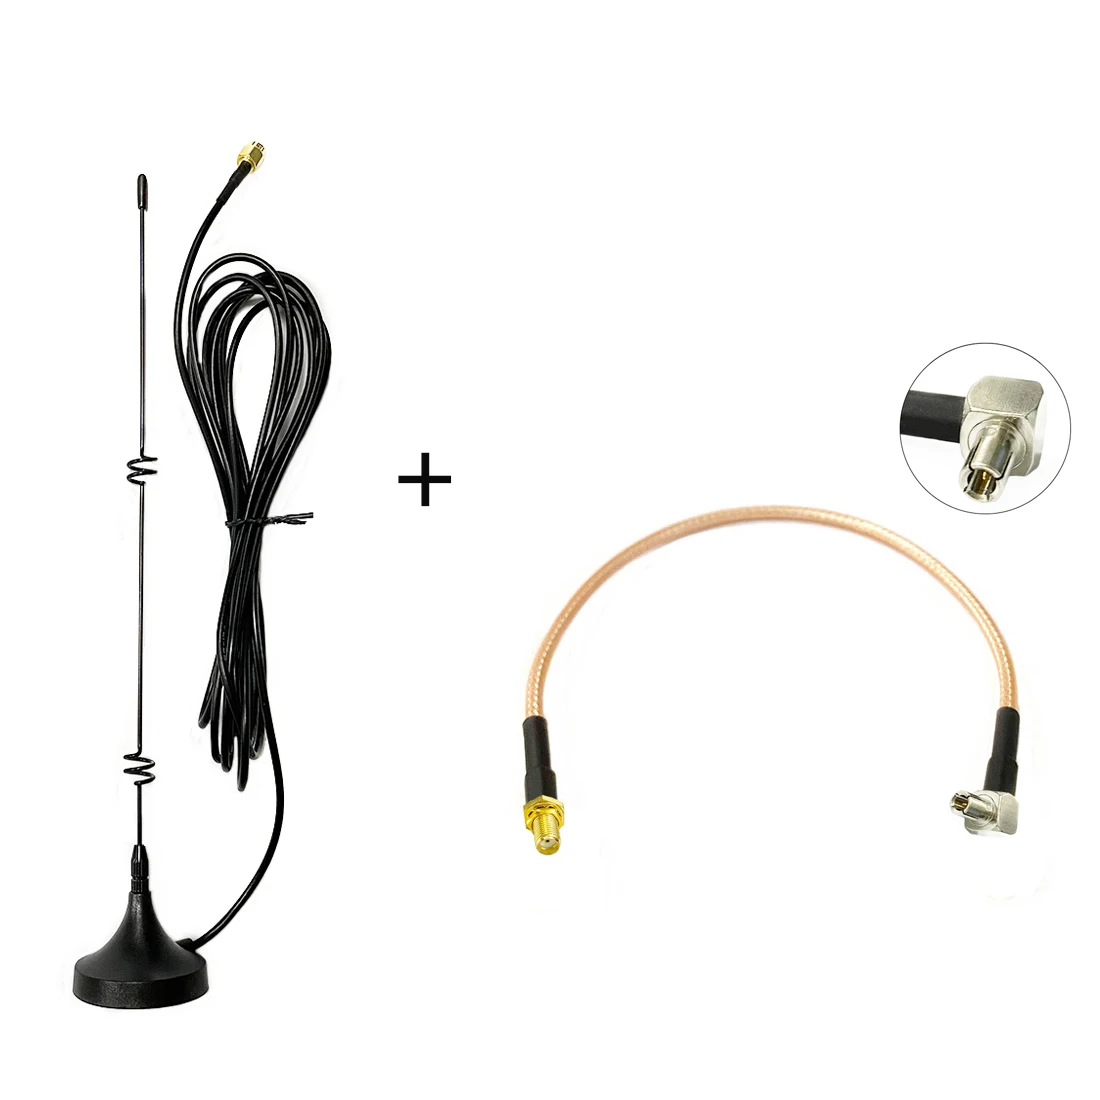 4G 3G GSM Antenna 6dbi High Gain Magnetic Base with 3meters Cable SMA Male +SMA Female Connector  to TS9 Male RG316 Cable 15cm 2 4ghz 5ghz 5 8ghz dual band 6dbi wifi antenna connector for mini pci card camera usb adapter wireless network router